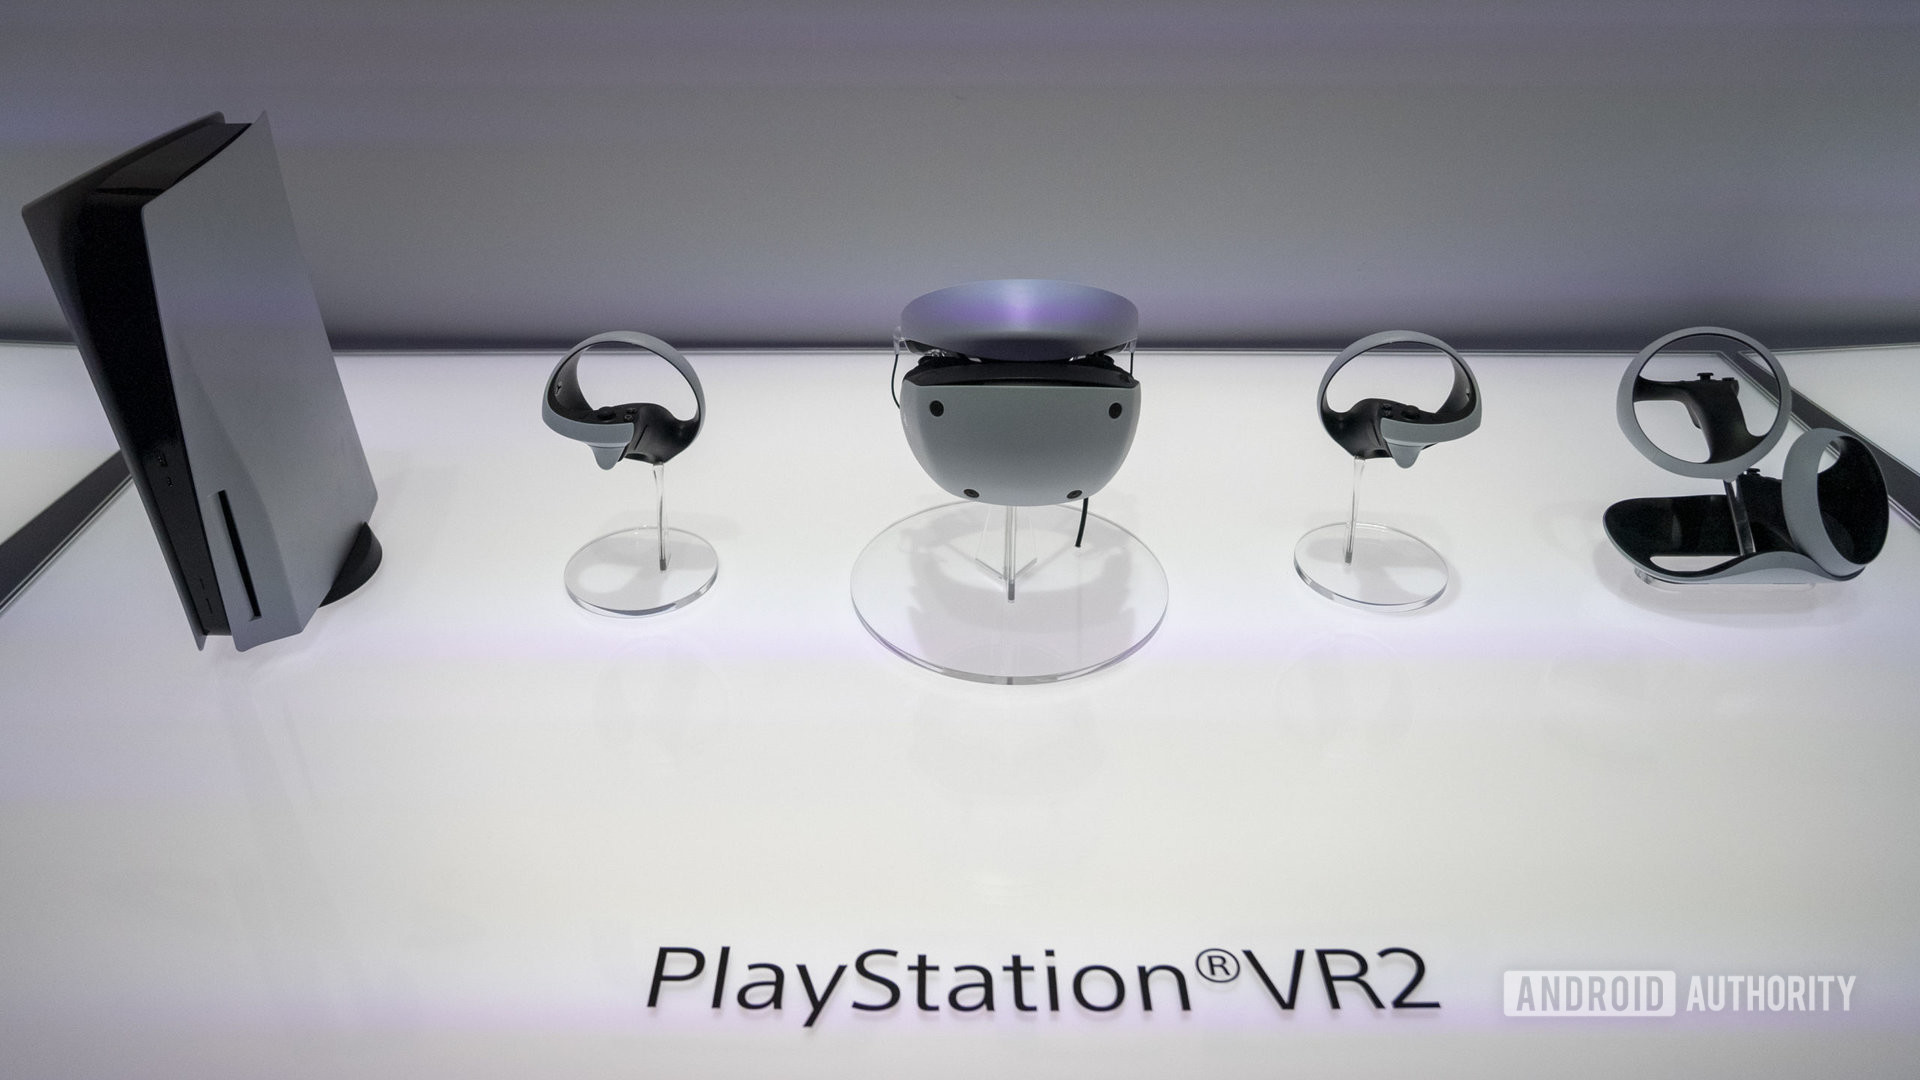 Sony PSVR hands-on: A massive jump forward from the original